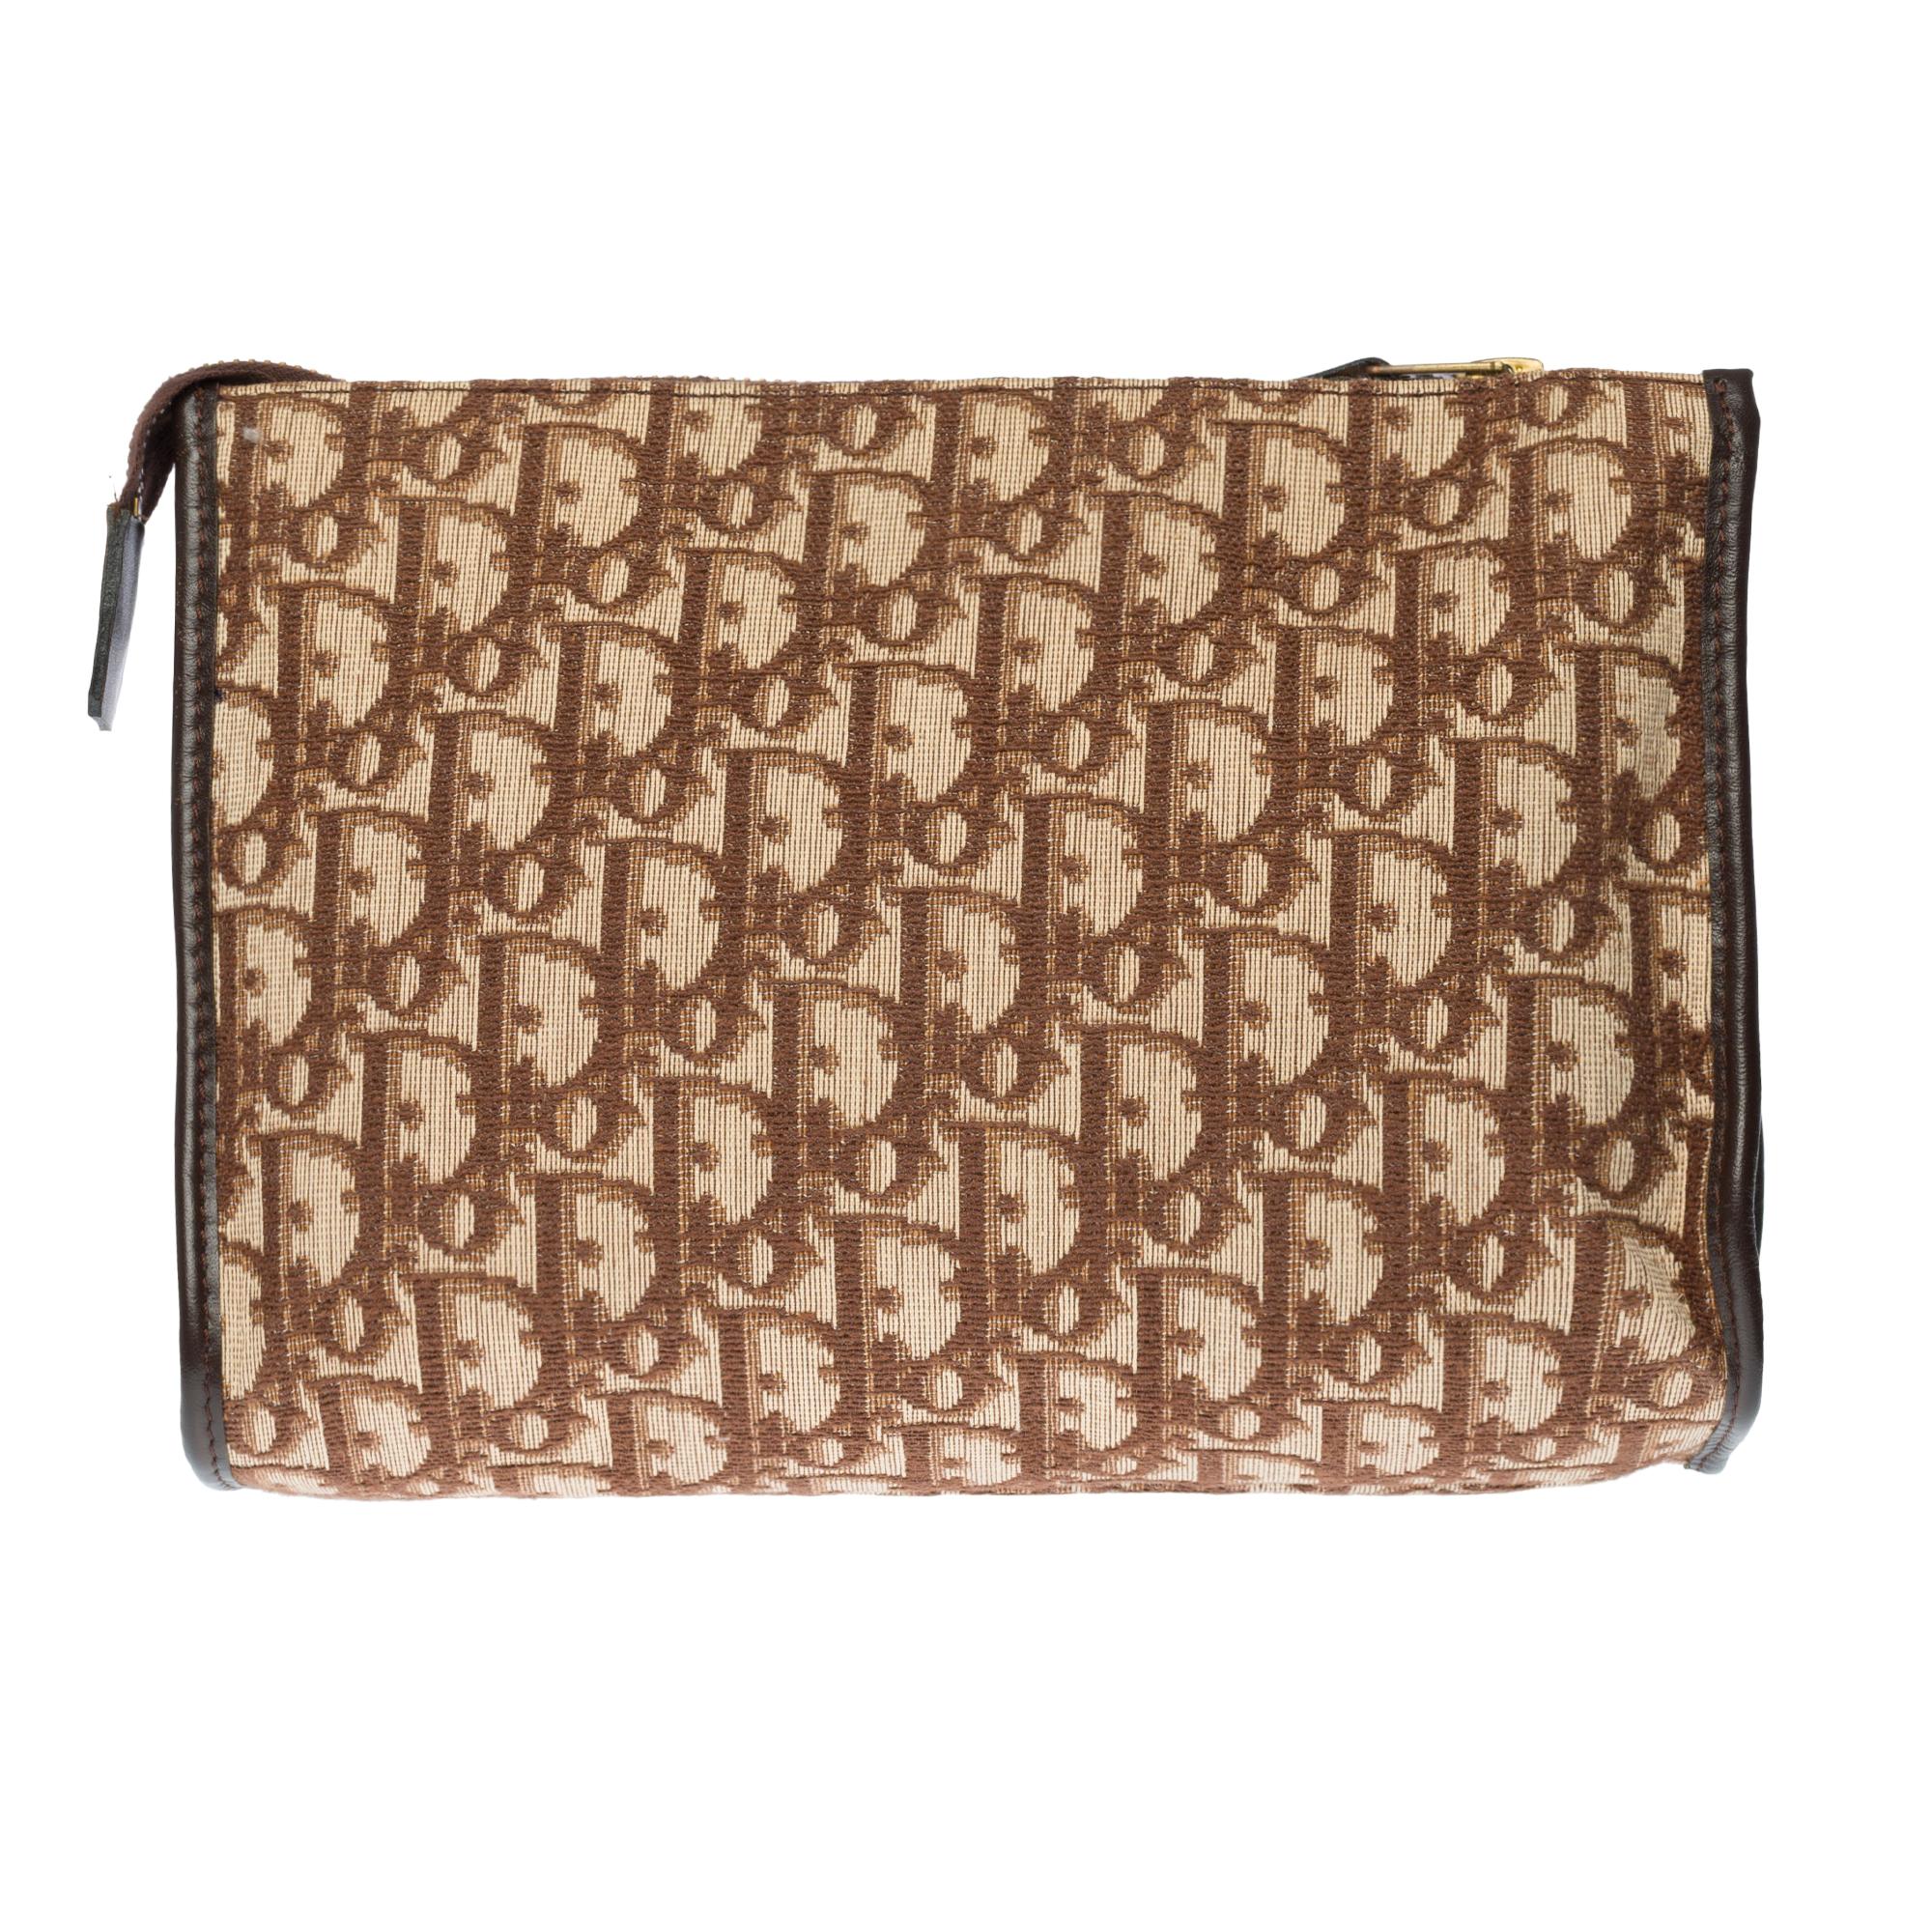 Beautiful Christian Dior cosmetic clutch in Dior monogram oblique canvas and brown leather.
Zip opening at the top .
Beige interior, 1 patch pocket.
Signature: 